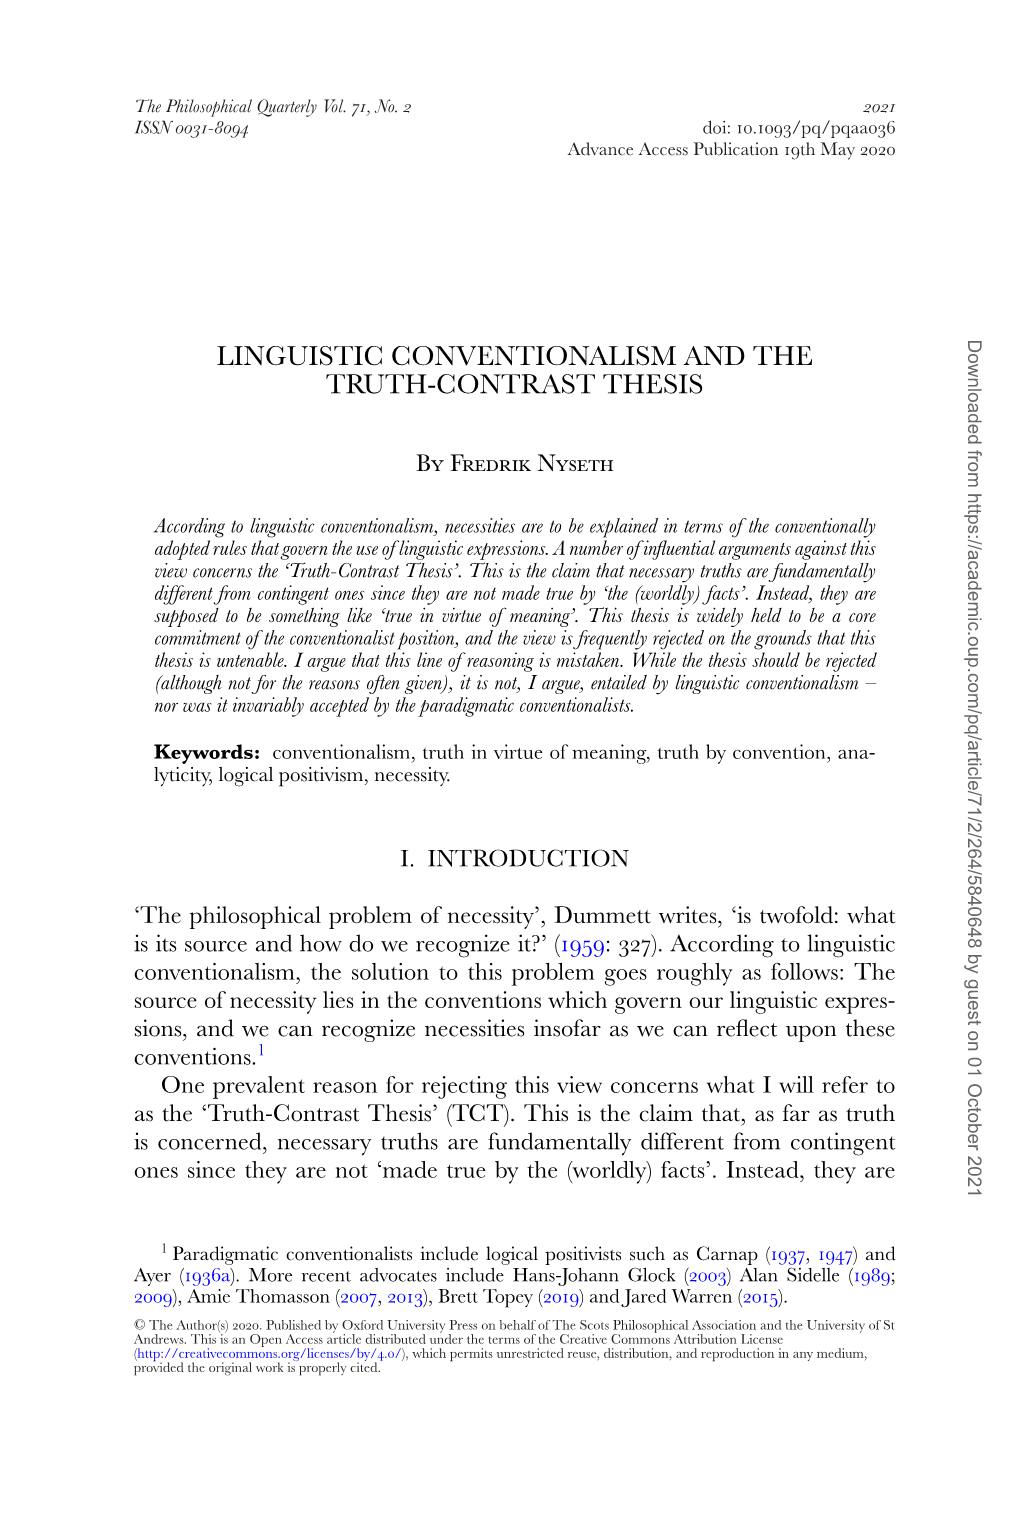 Linguistic Conventionalism and the Truth-Contrast Thesis